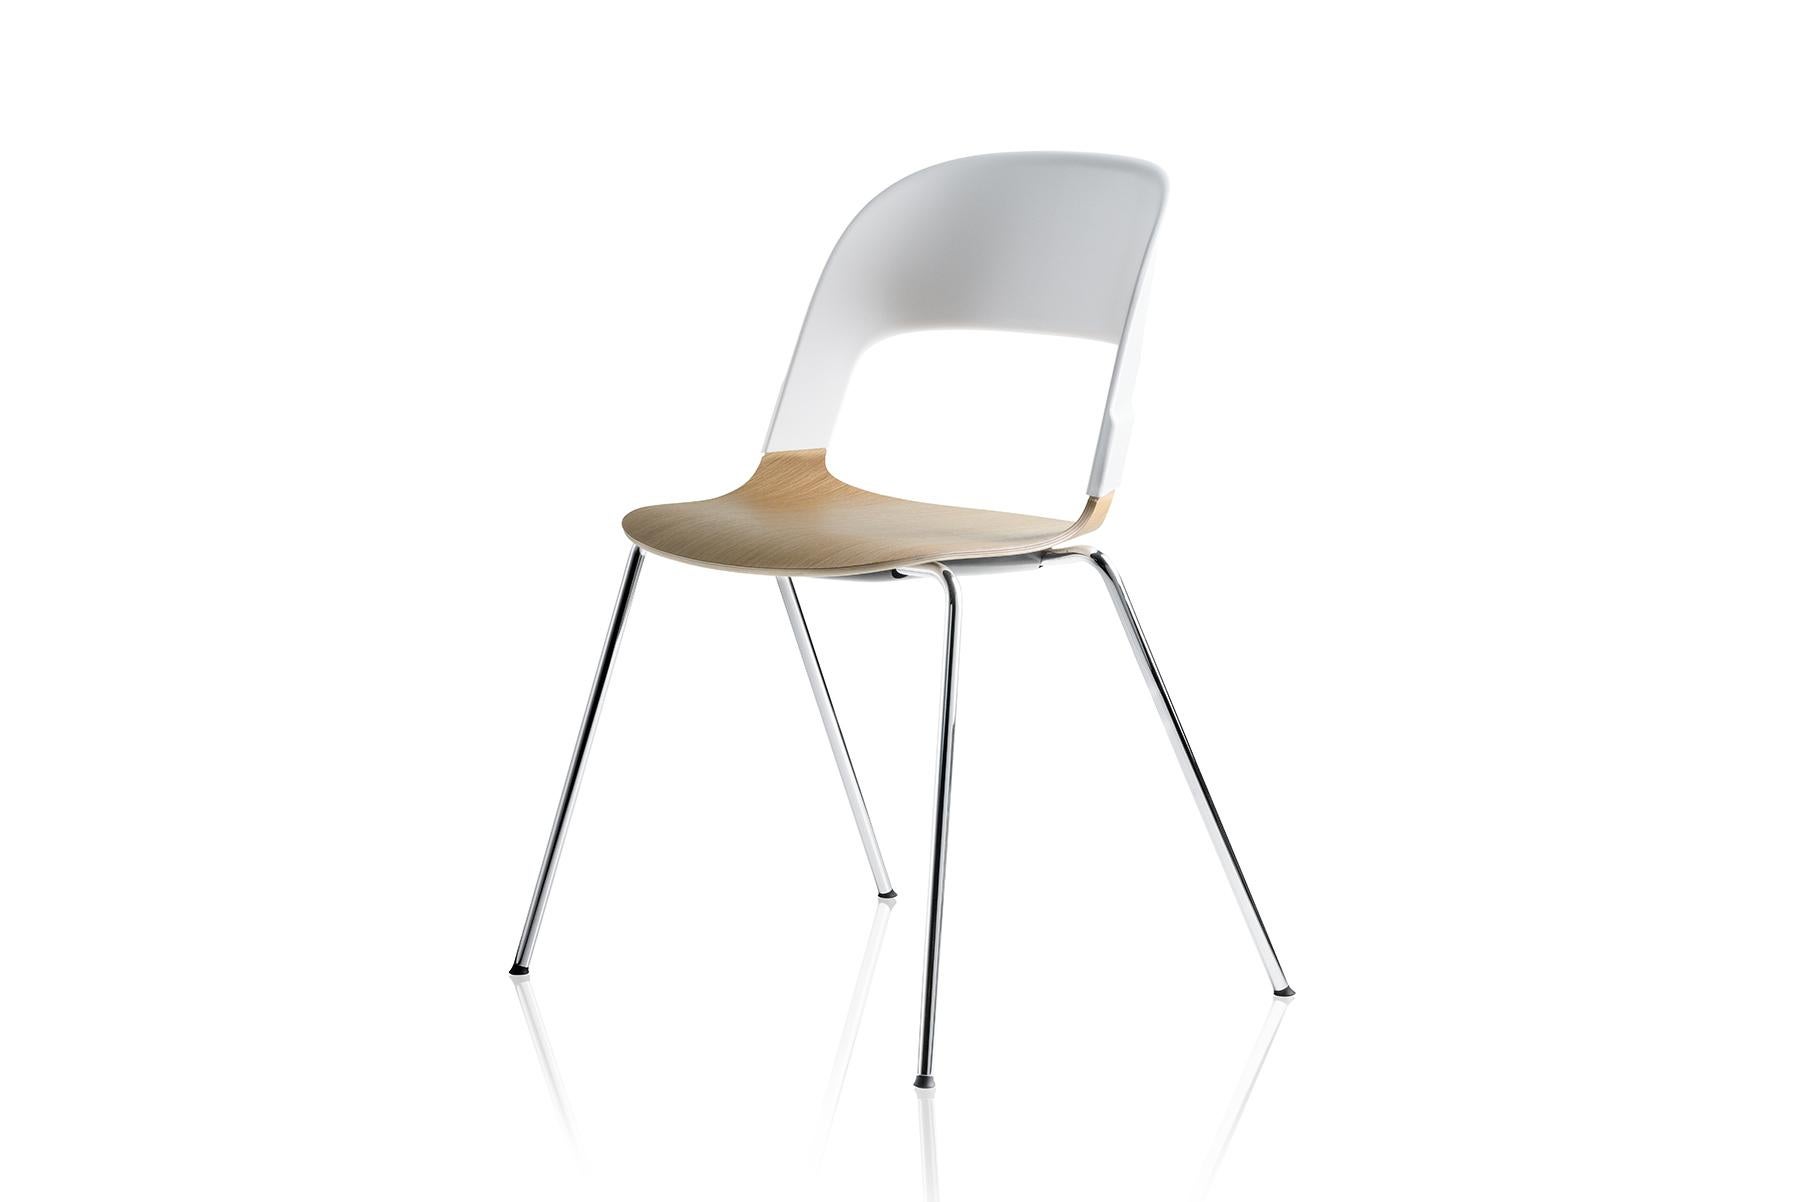 With pair we present a unique design paired with unlimited possibilities. Pair is a stacking chair and comes in a mix of veneer and plastic that differentiates it from the existing stackable chairs in our collection. Pair is the definition of a